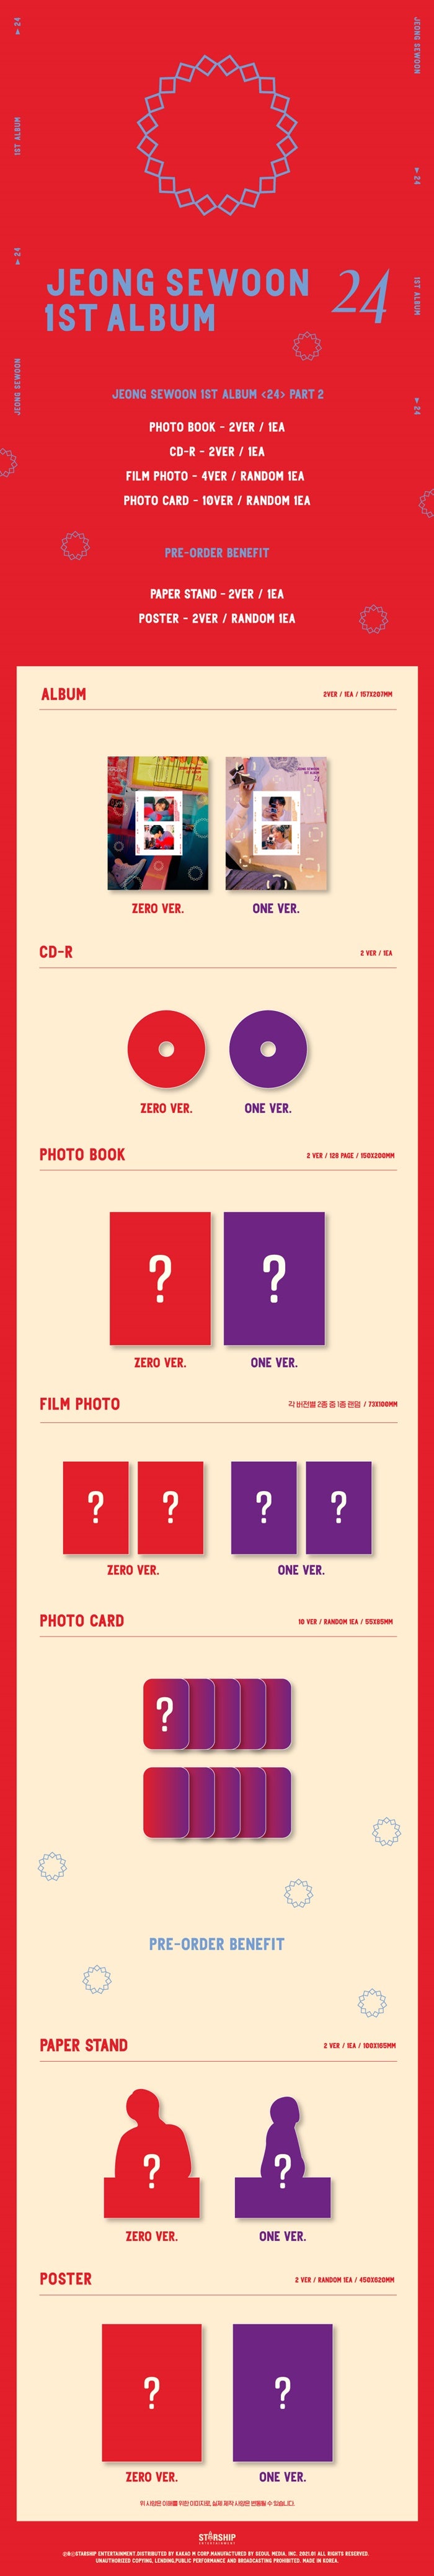 1 CD
1 Photo Book (128 pages)
1 Film Photo
1 Photo Card